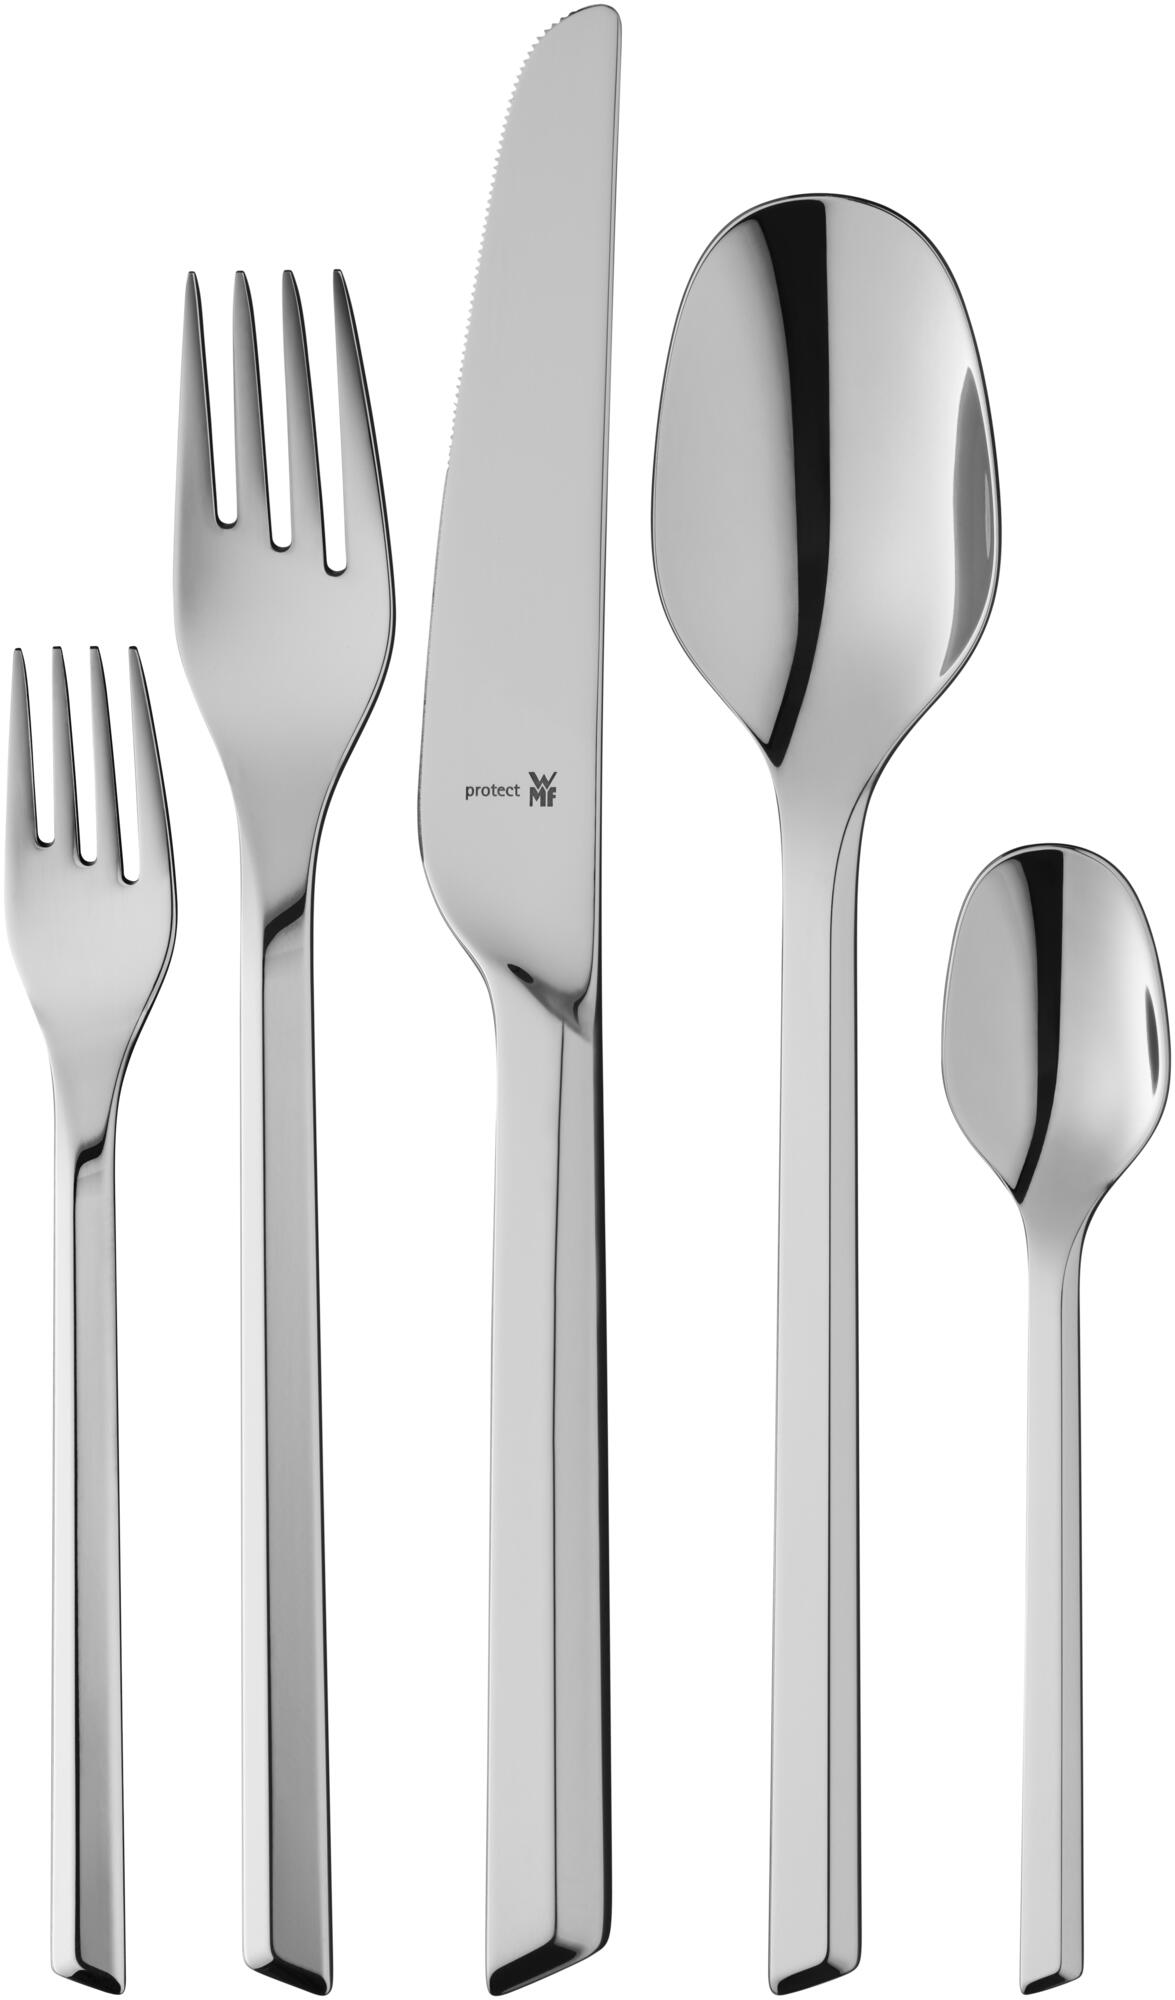  WMF Cutlery Set Merit Cromargan Protect Stainless Steel  Polished Extremely Scratch Resistant with Inserted Blade (30-Pieces for 6  People) : Home & Kitchen